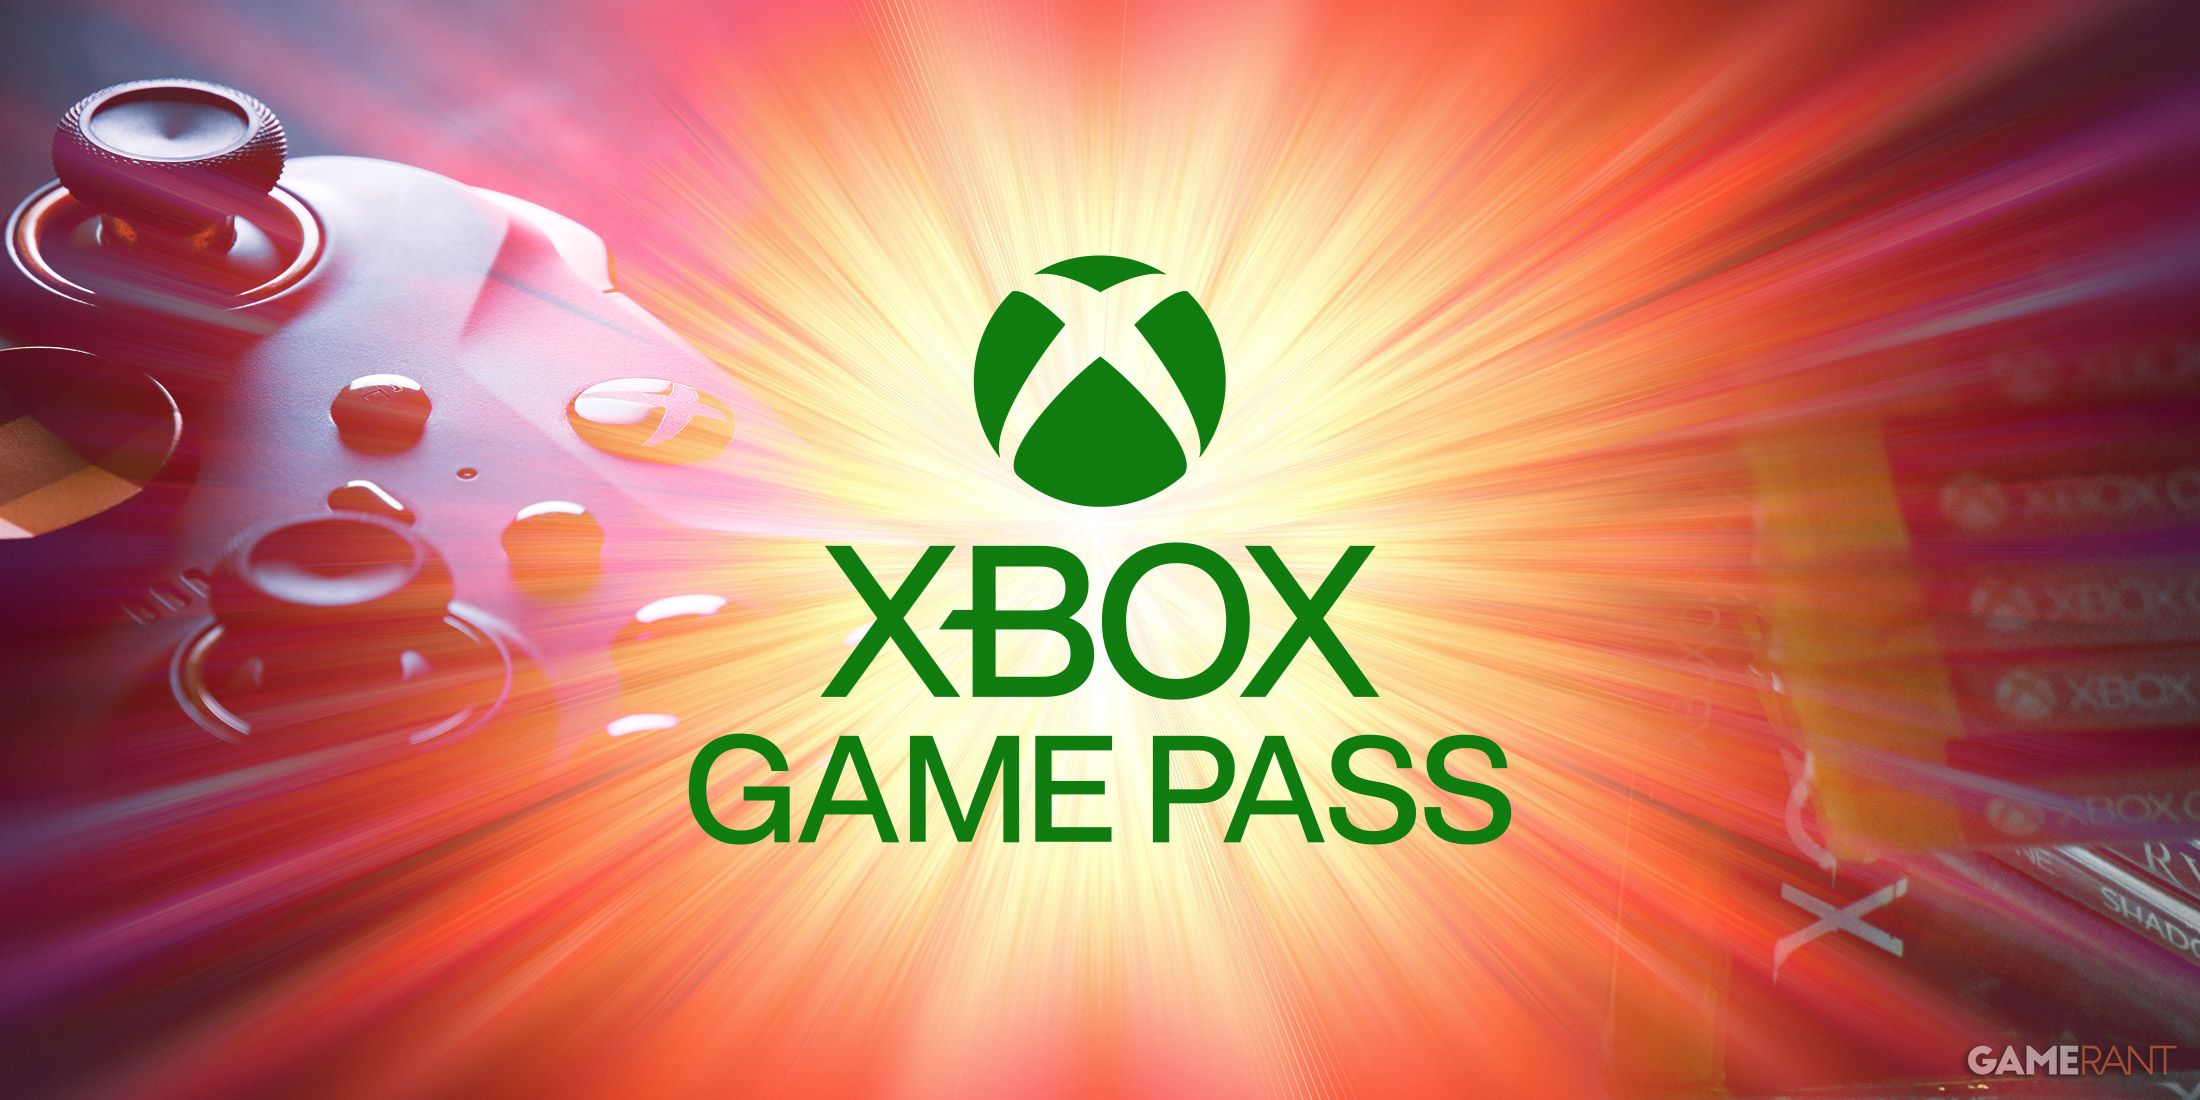 Xbox Game Pass July 2024